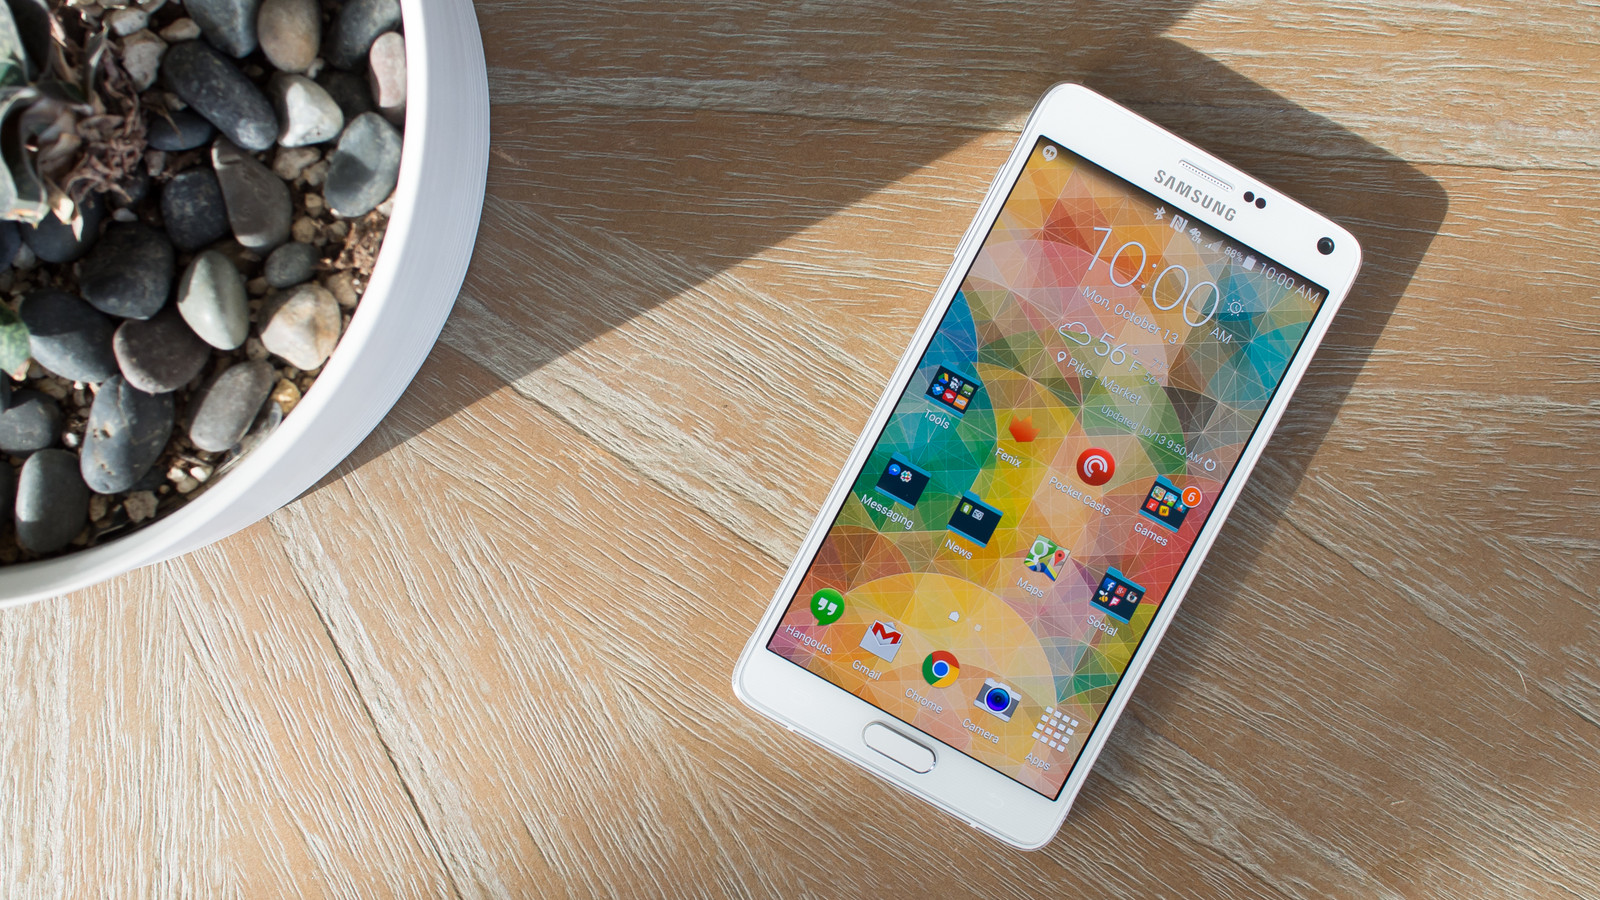 Samsung Galaxy Note 4 Specification